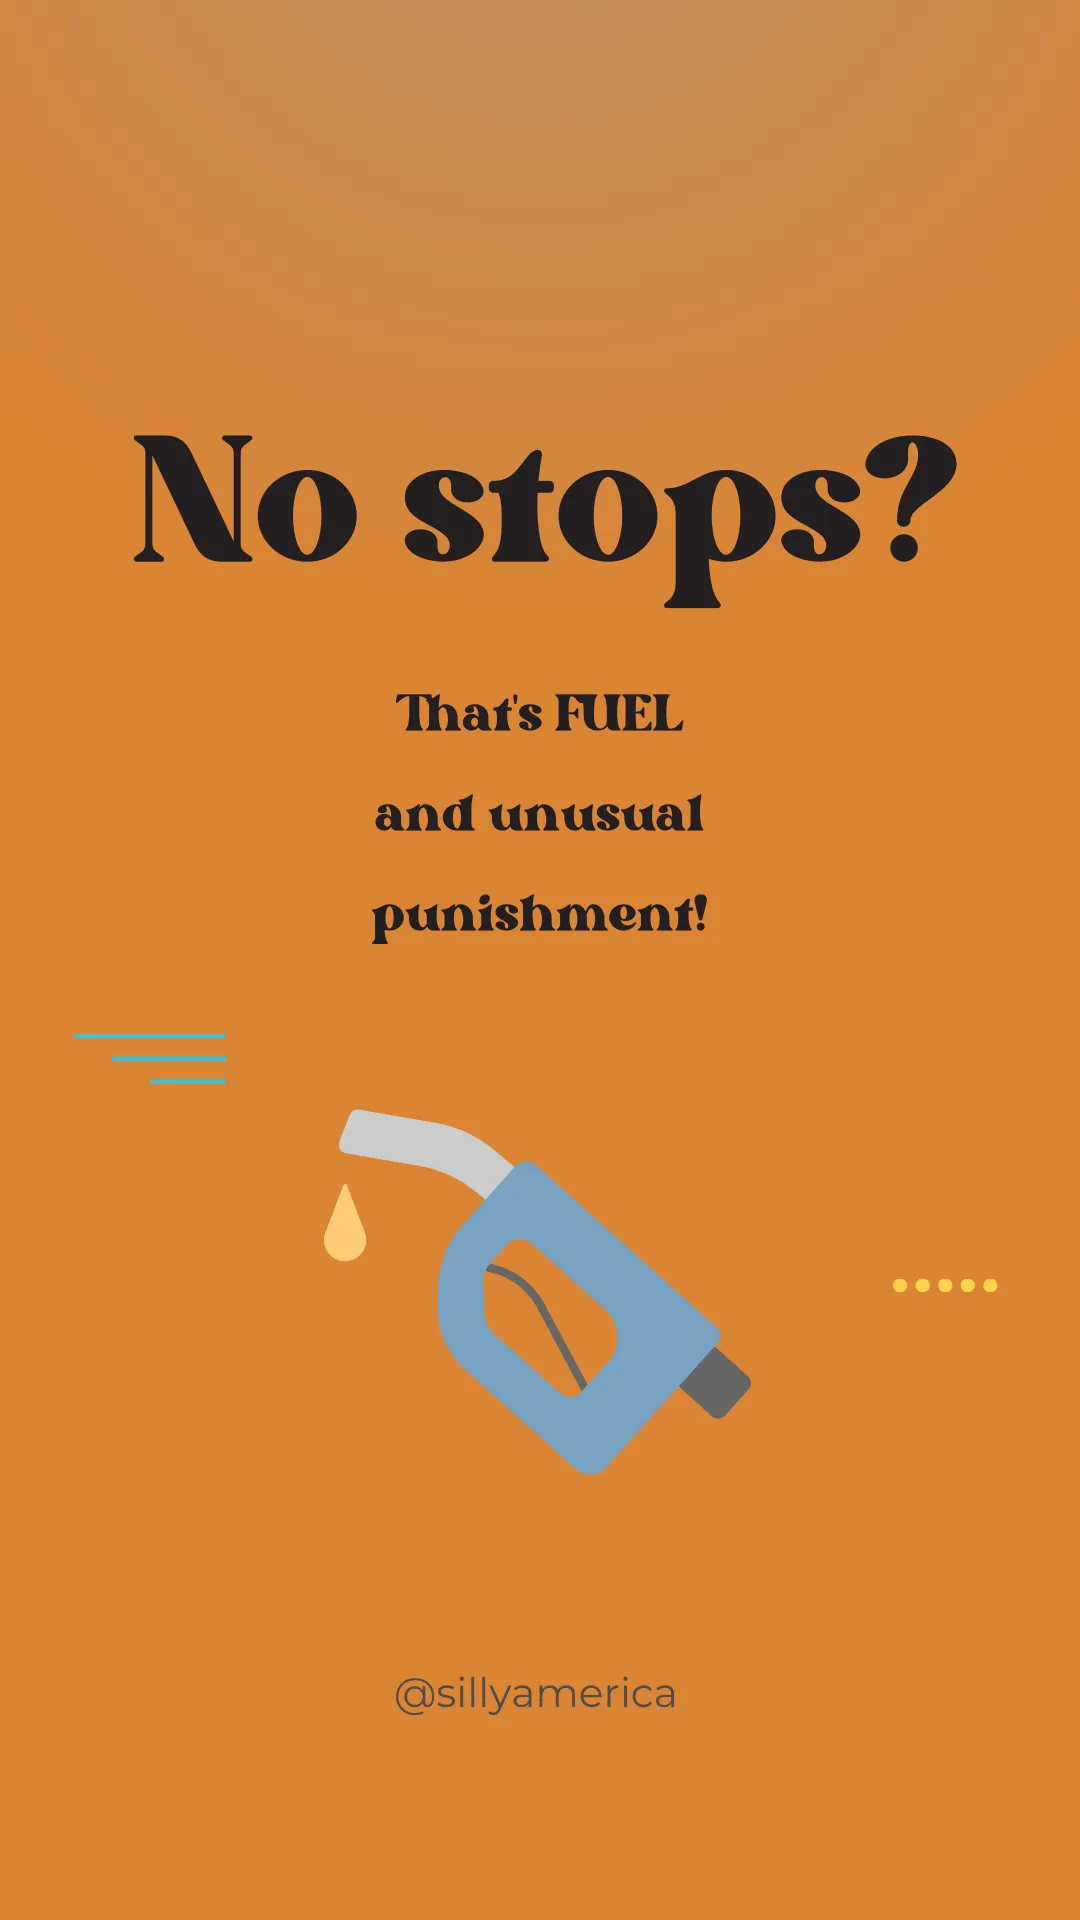 No stops? That's FUEL and unusual punishment! - Road Trip Puns